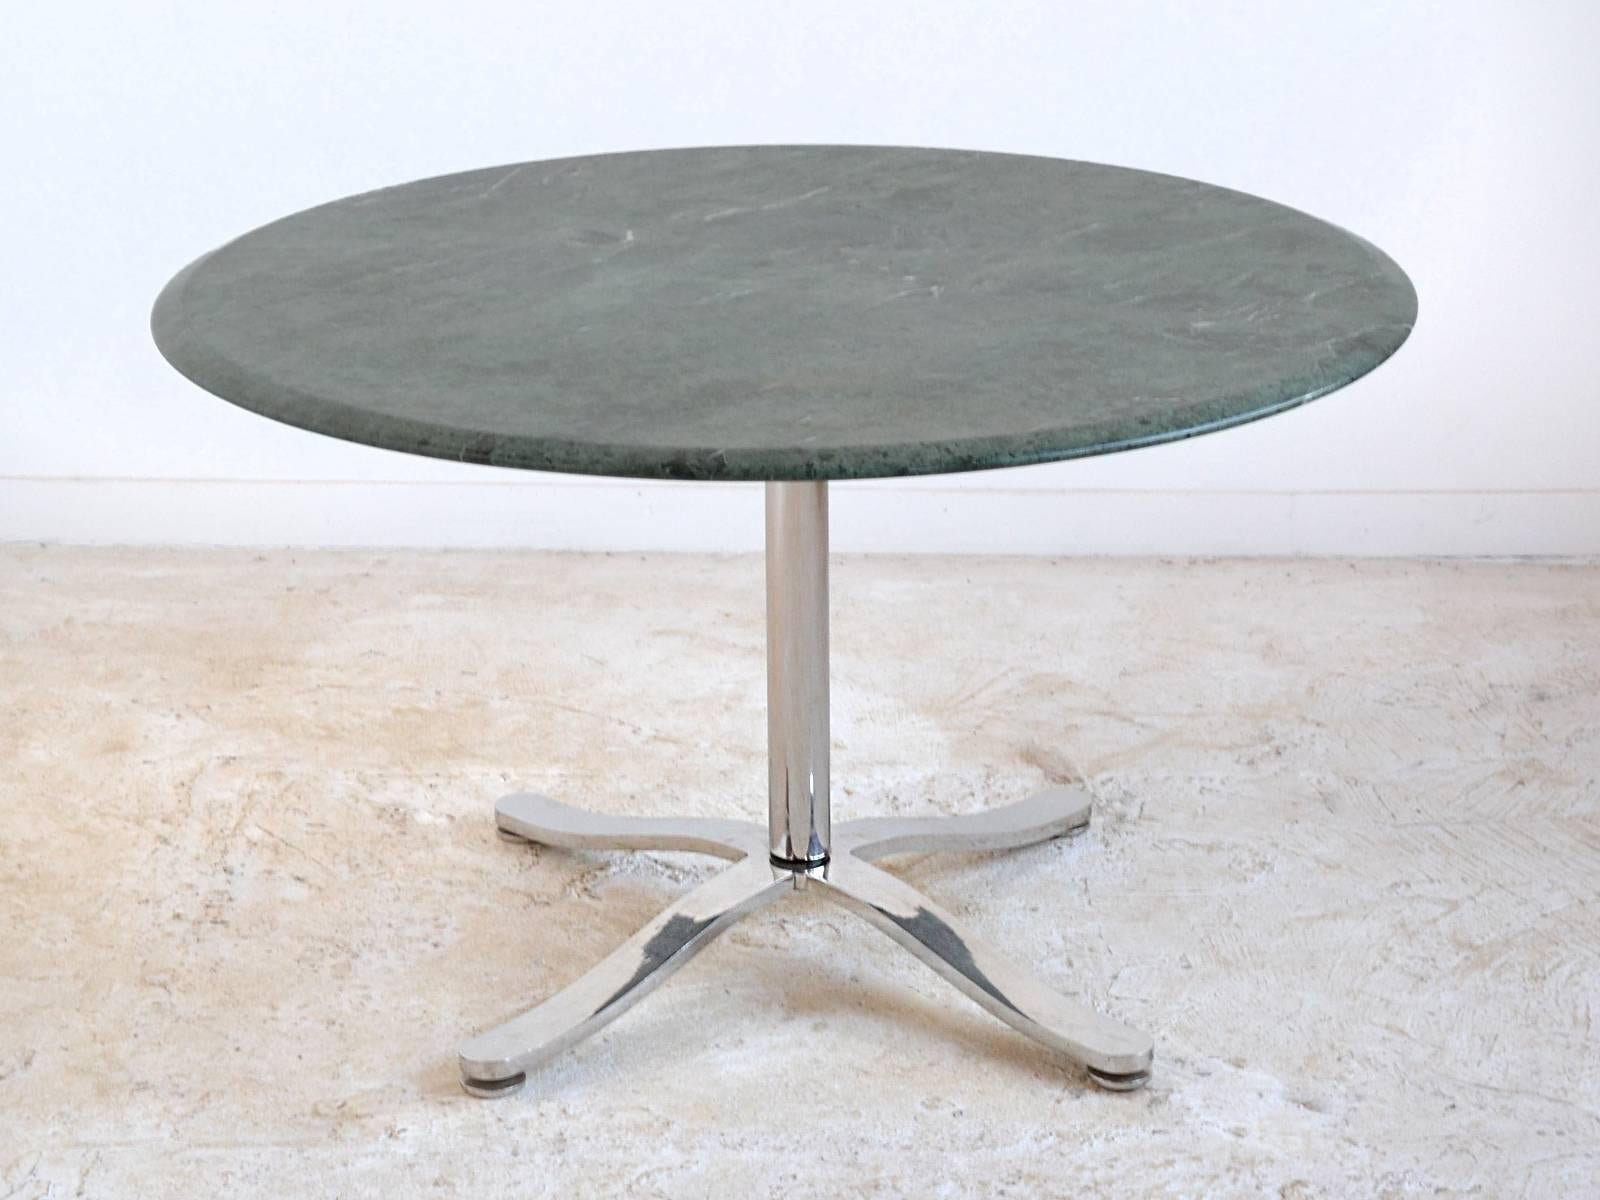 Zographos' aesthetic is one of quiet refinement, elegant lines, subtle details, and impeccable craftsmanship. This pedestal table designed in 1961 has a base of polished stainless steel and a emerald green marble top. Some of the delightful details